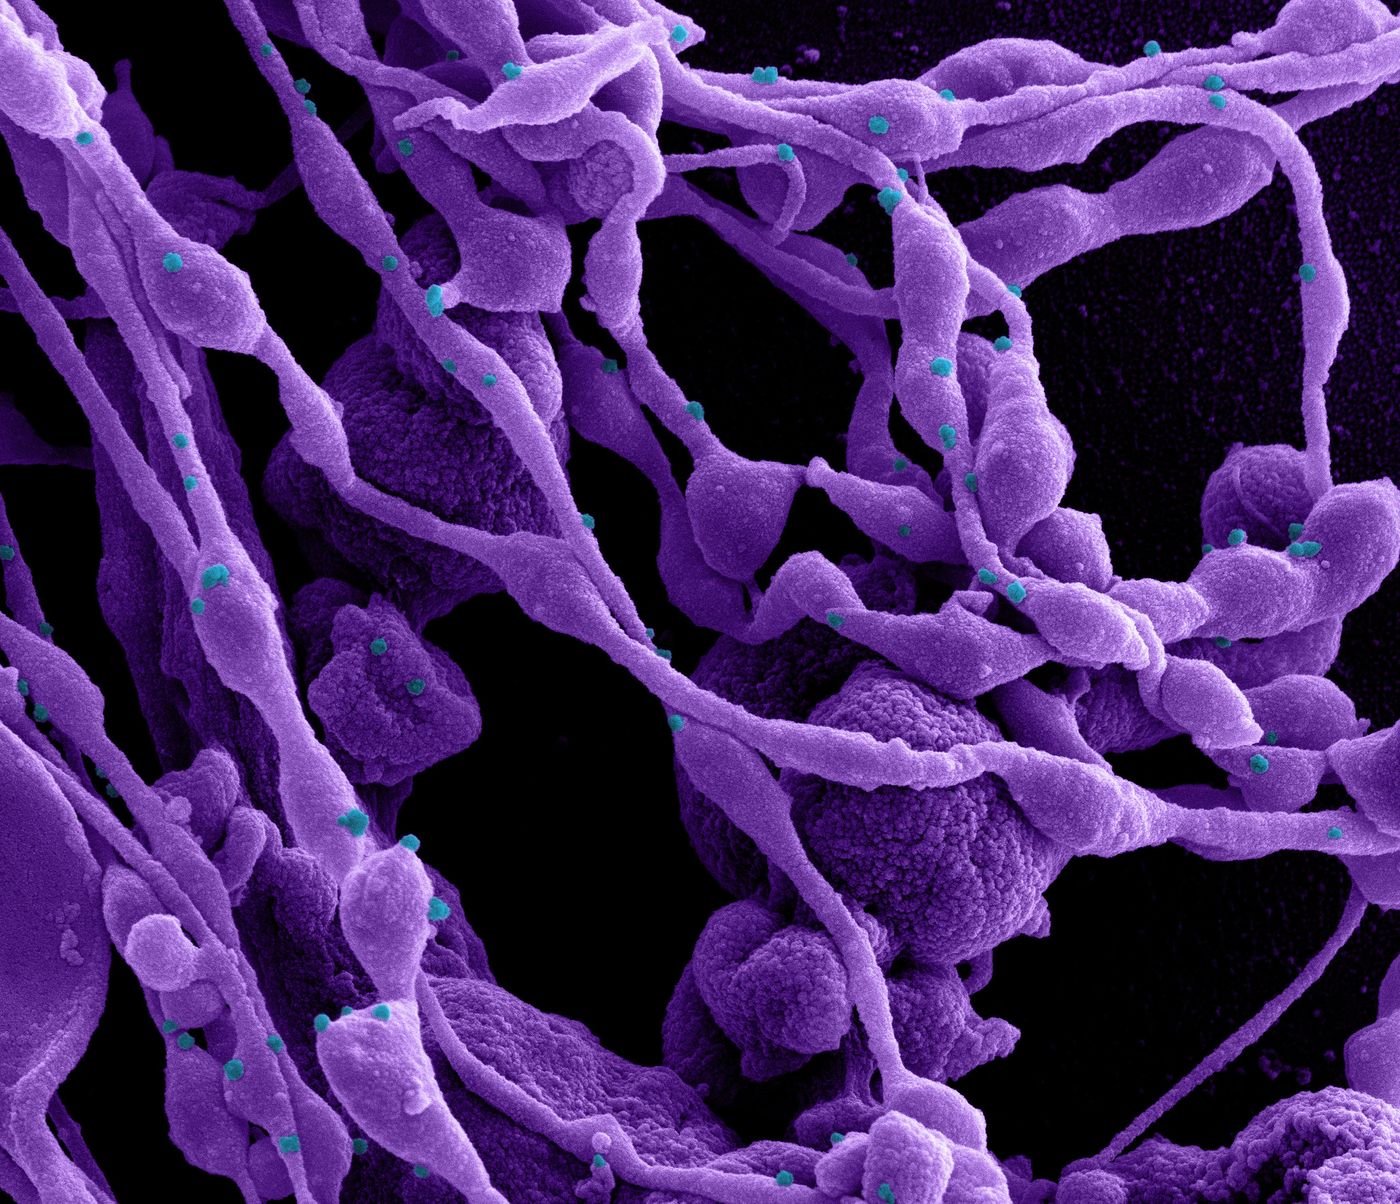 Colorized scanning electron micrograph of a cell (purple) infected with SARS-CoV-2 virus particles (blue), isolated from a patient sample. Image captured at the NIAID Integrated Research Facility (IRF) in Fort Detrick, Maryland. / Credit: Image and caption courtesy NIAID